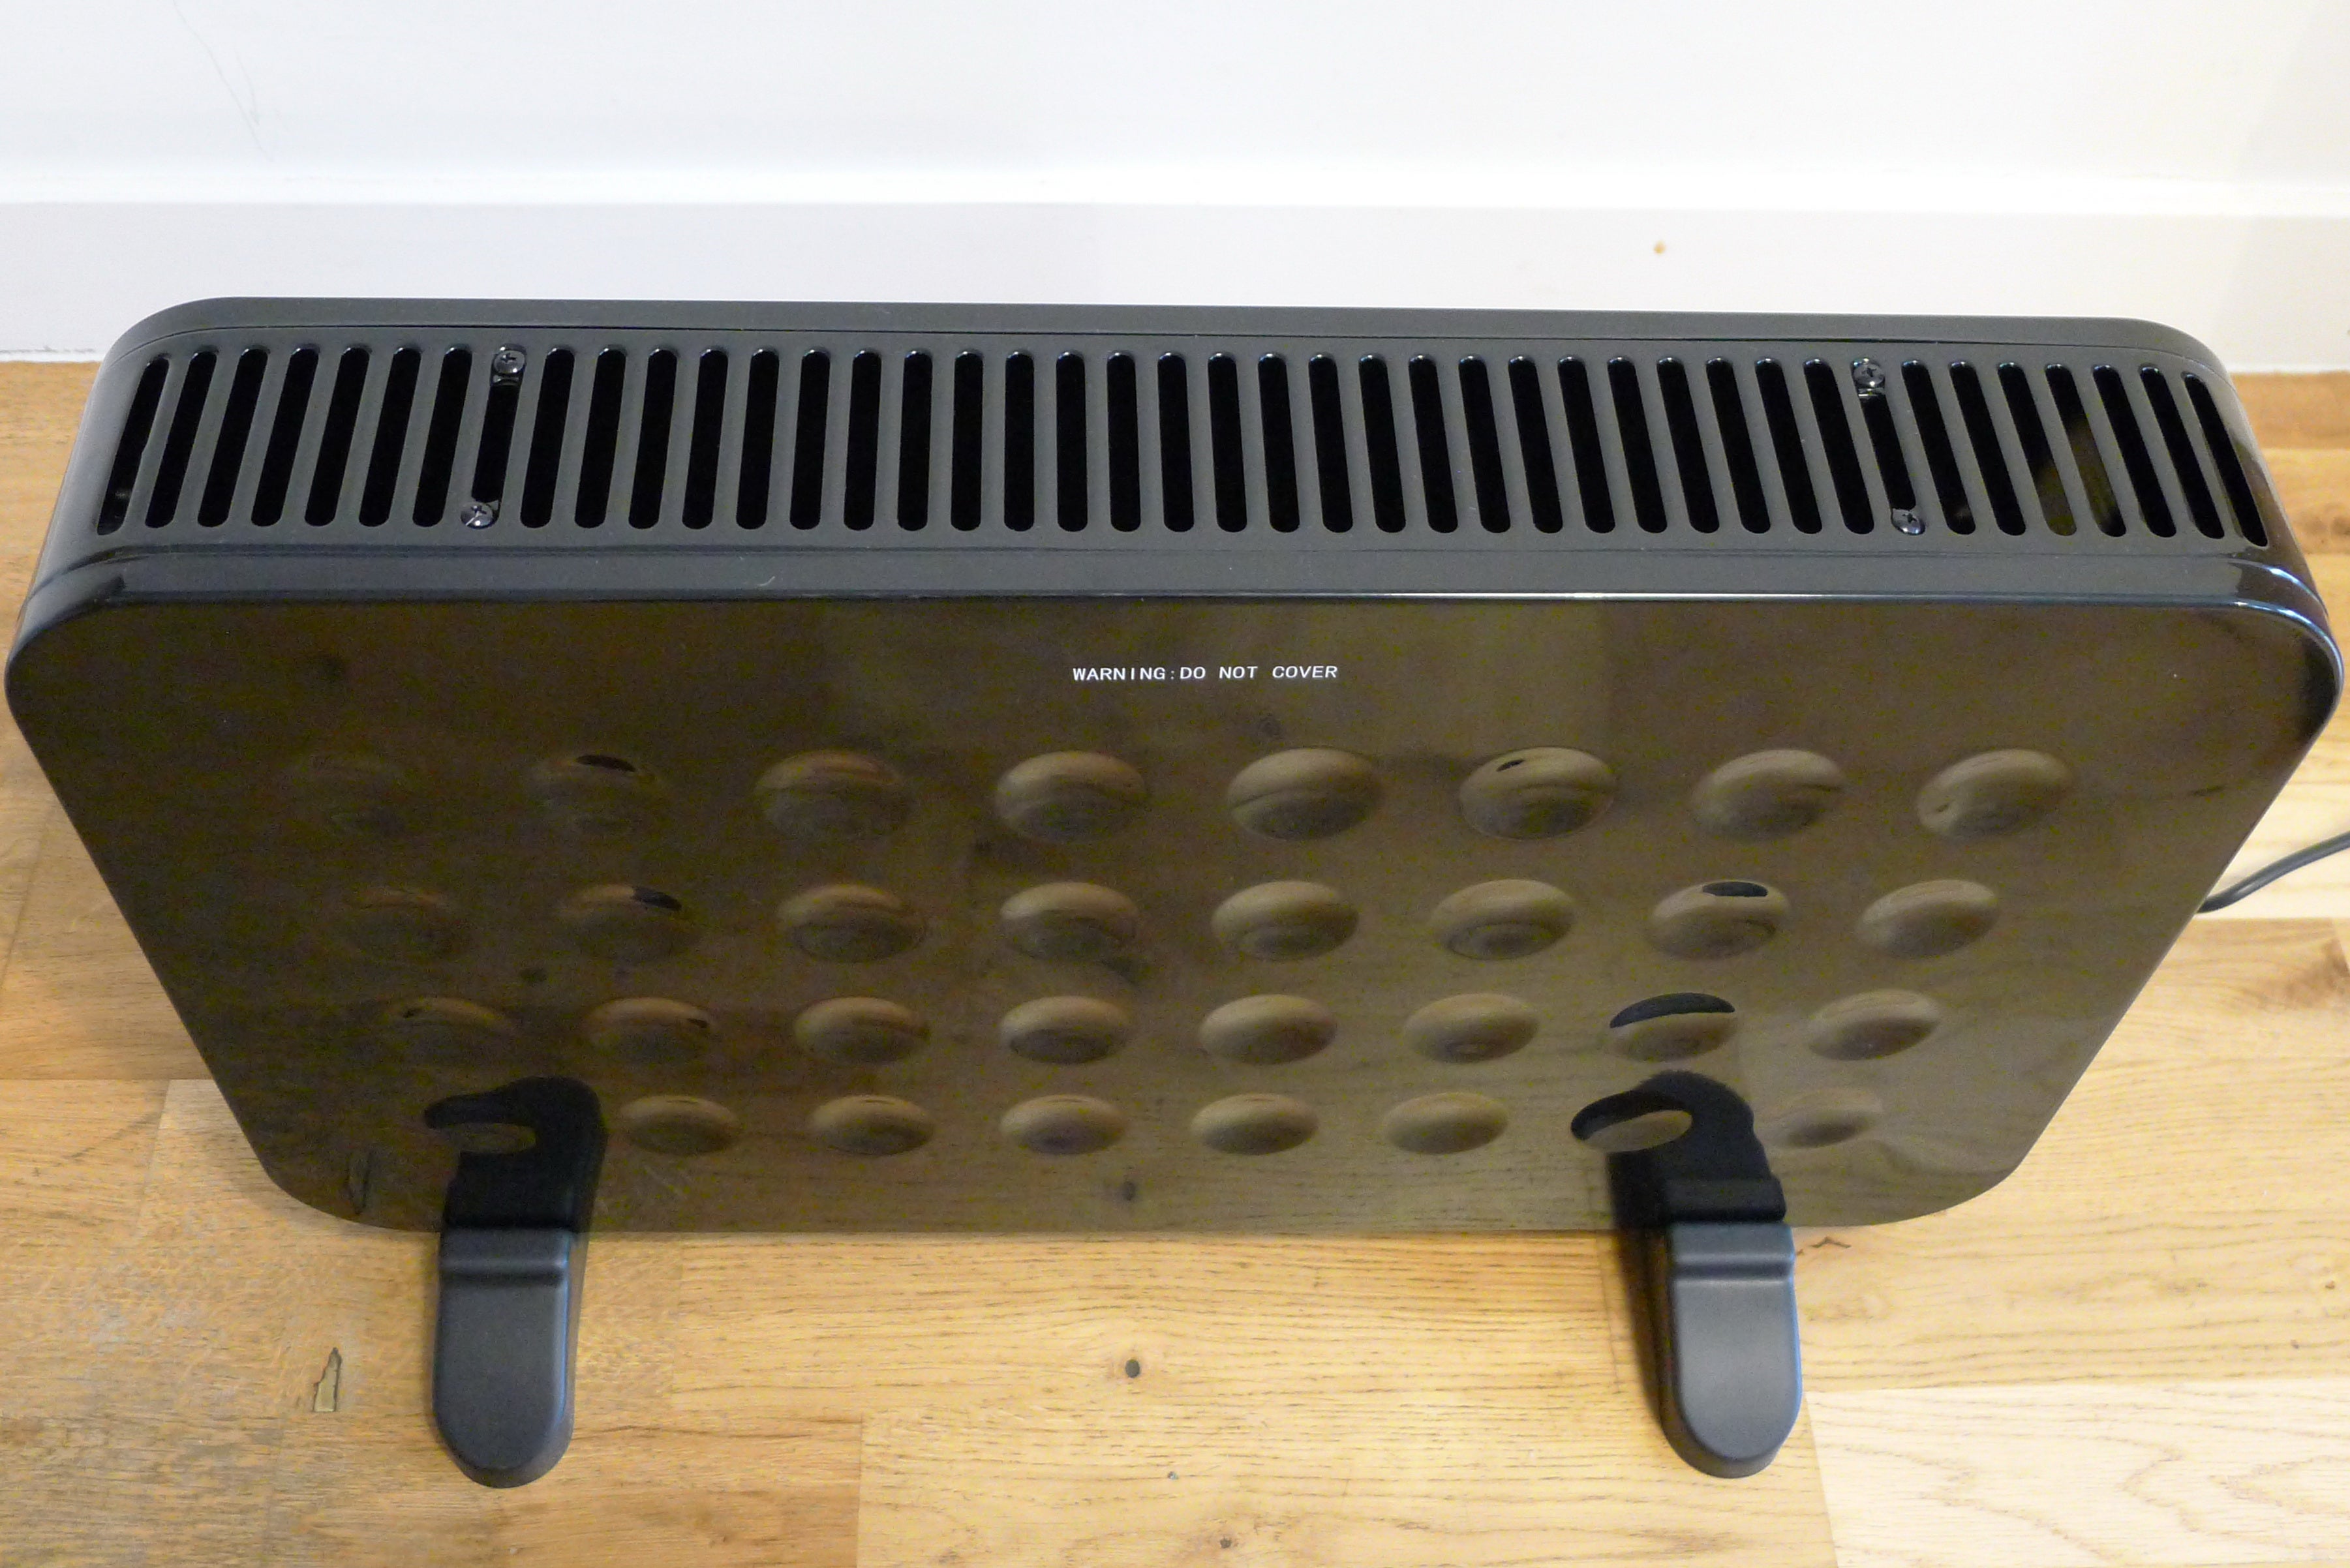 Top front view of a black Fine Element contemporary convector heater standing on floor